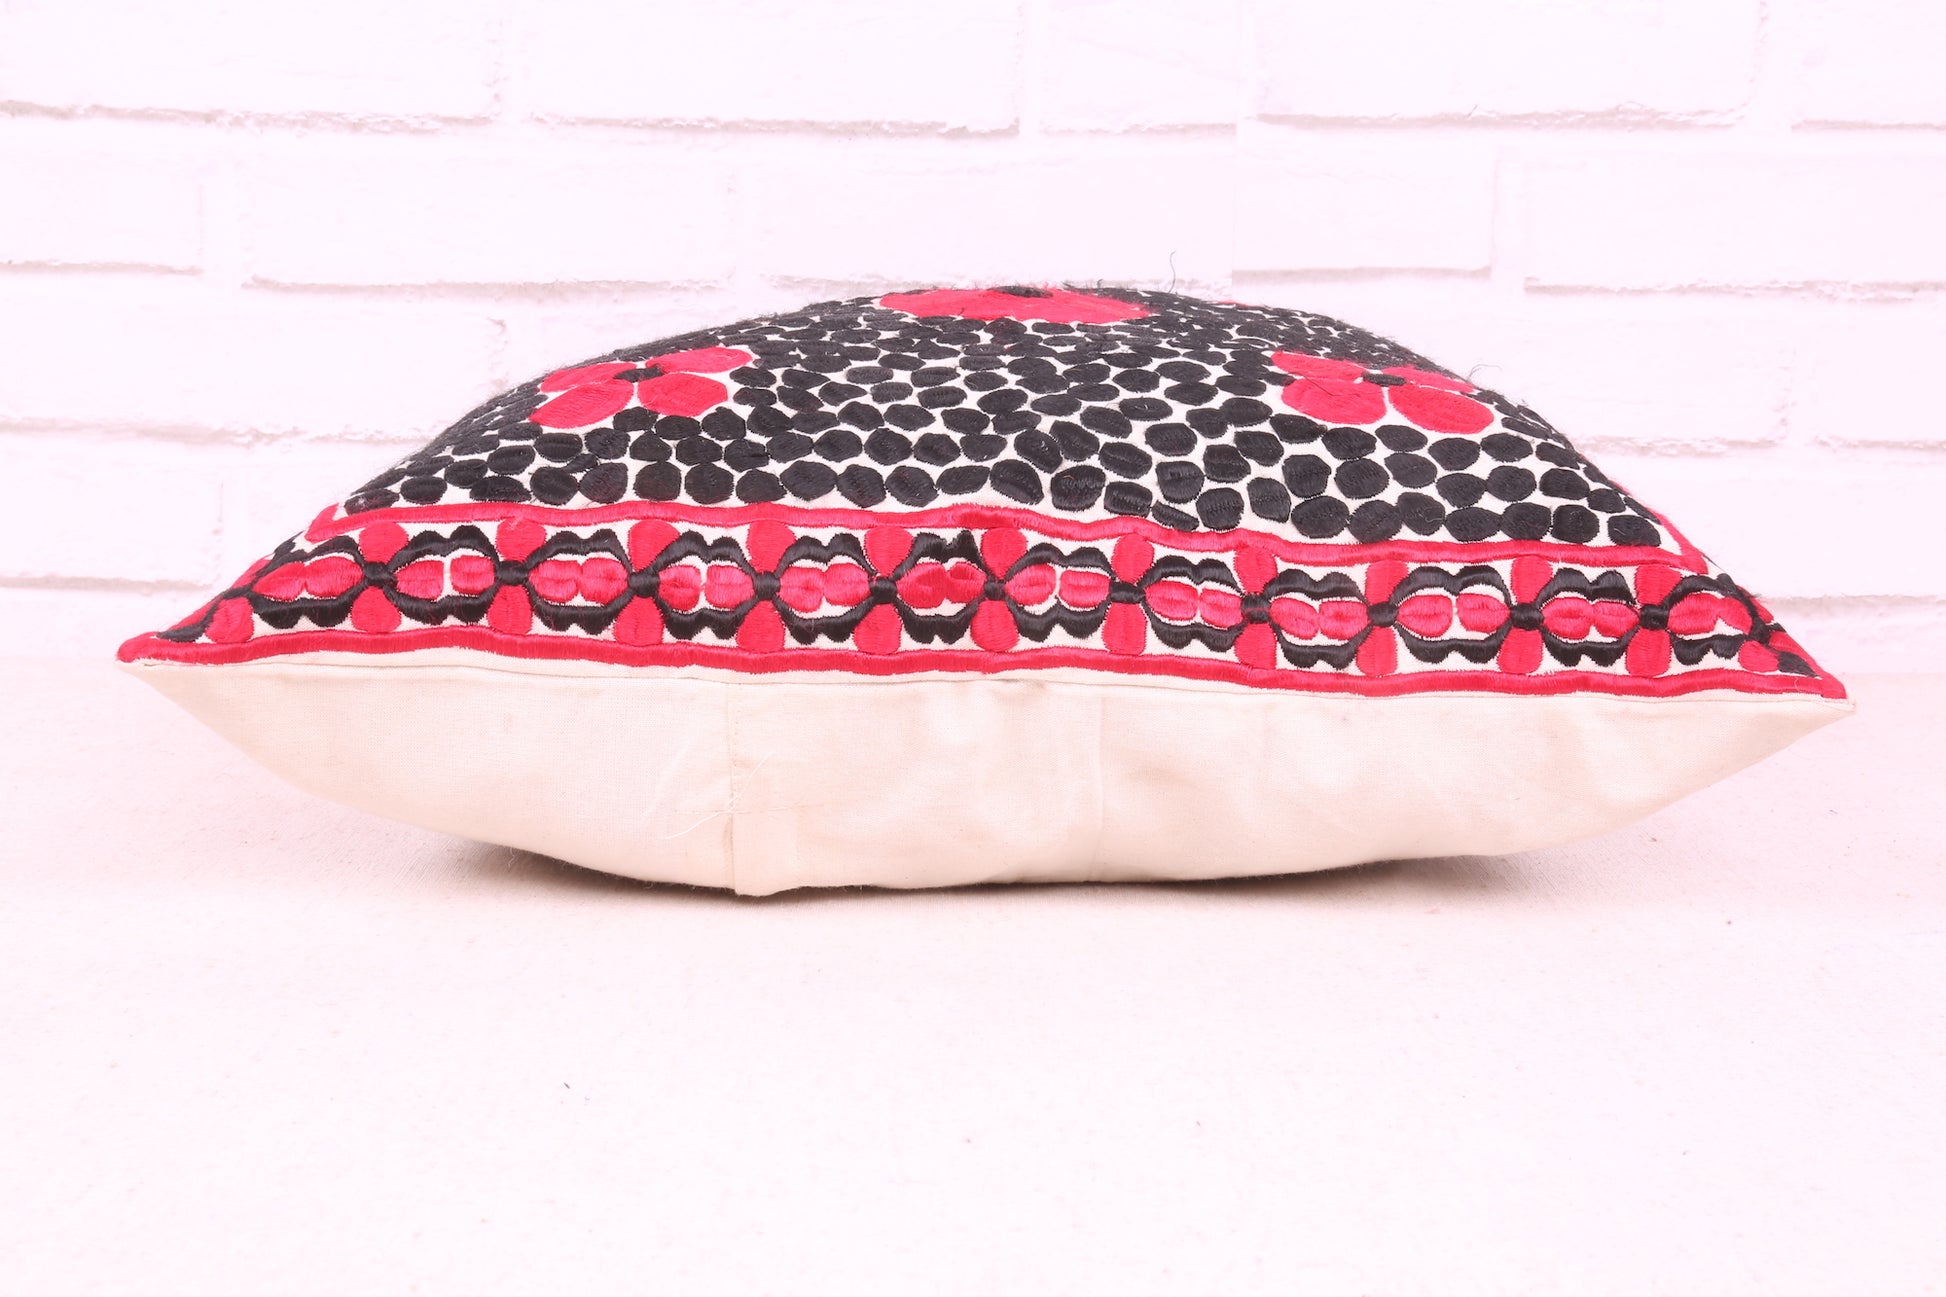 Moroccan Kilim Cushion in Black and Red 17.3 inches X 17.3 inches